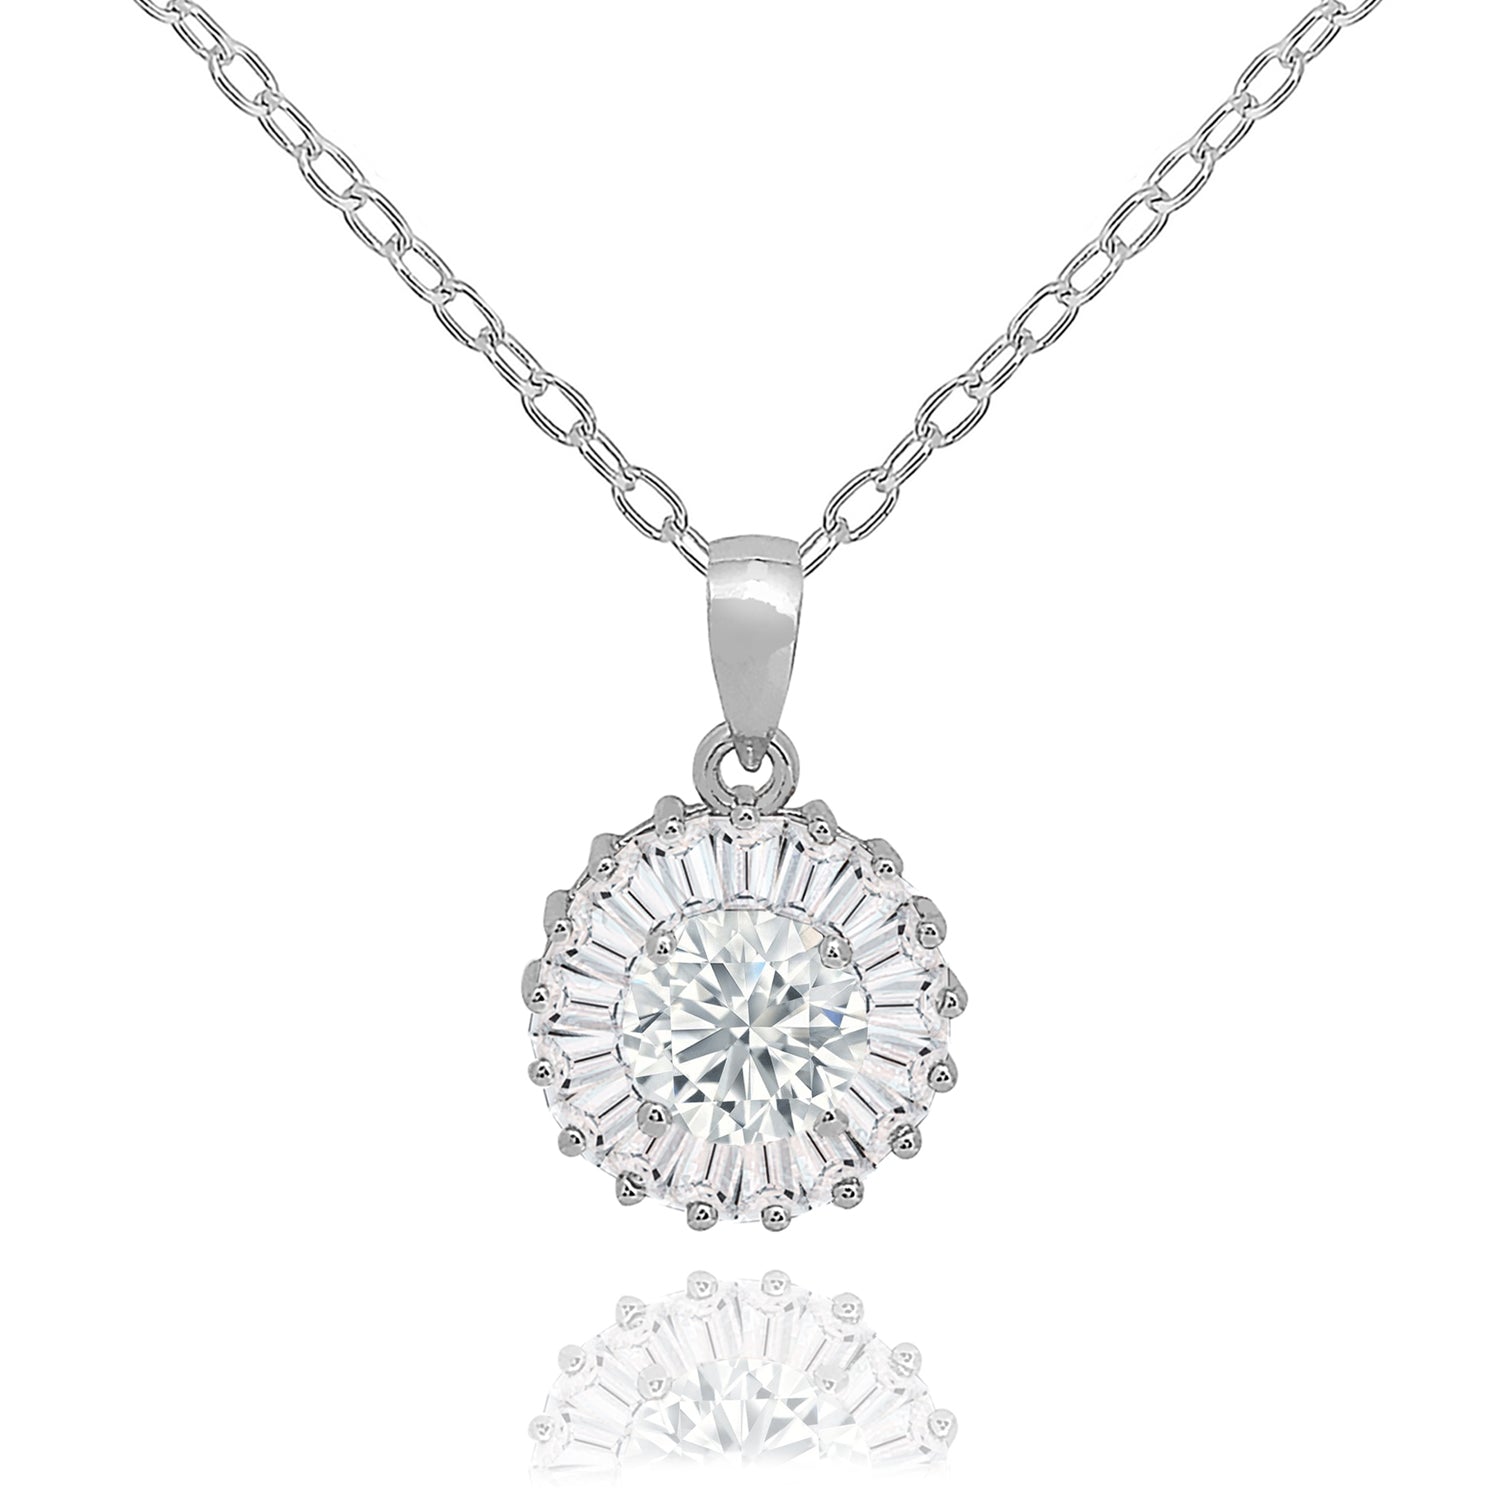 Selah 18k White Gold Plated Silver Pendant Necklace with Simulated Diamond CZ Crystals